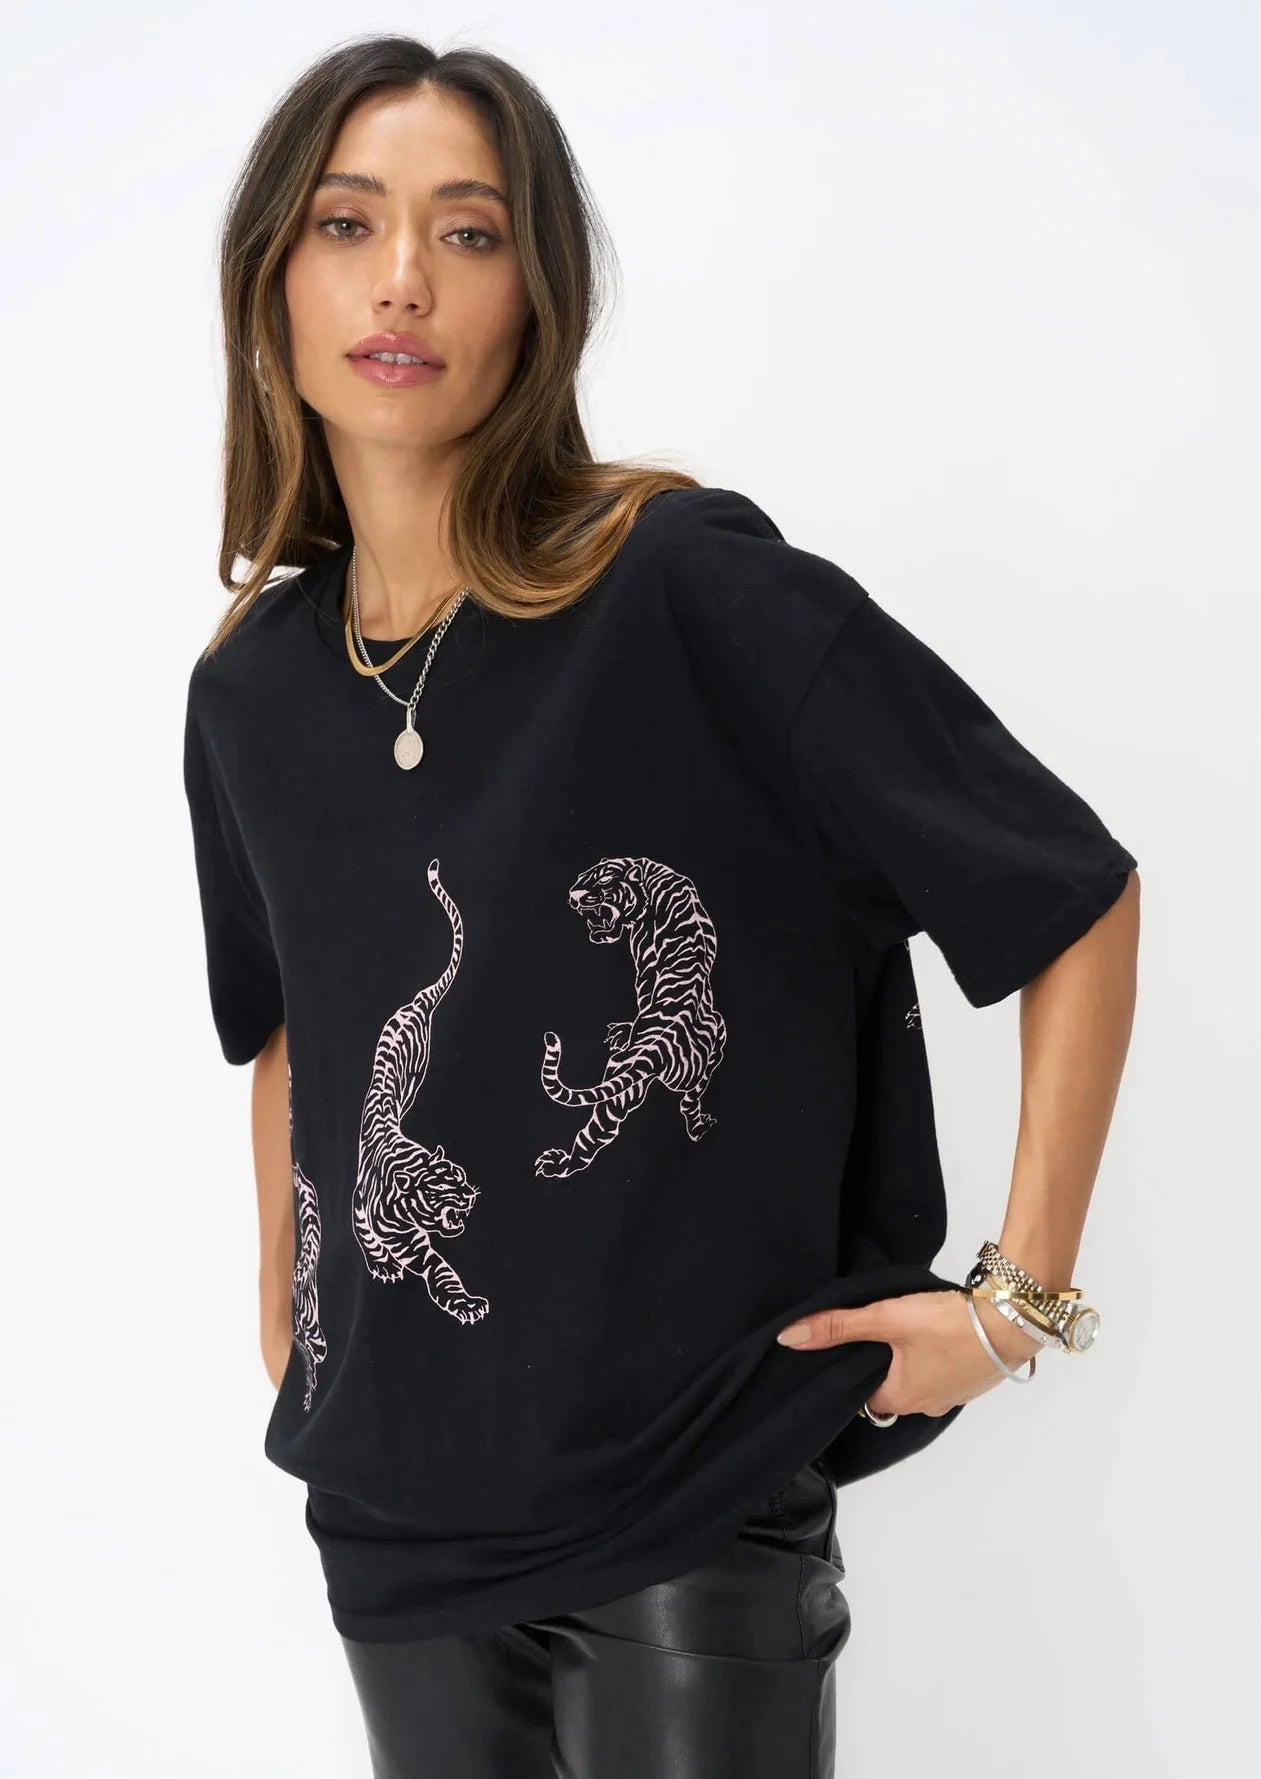 black oversized tee shirt with tiger graphic that wraps all the way around